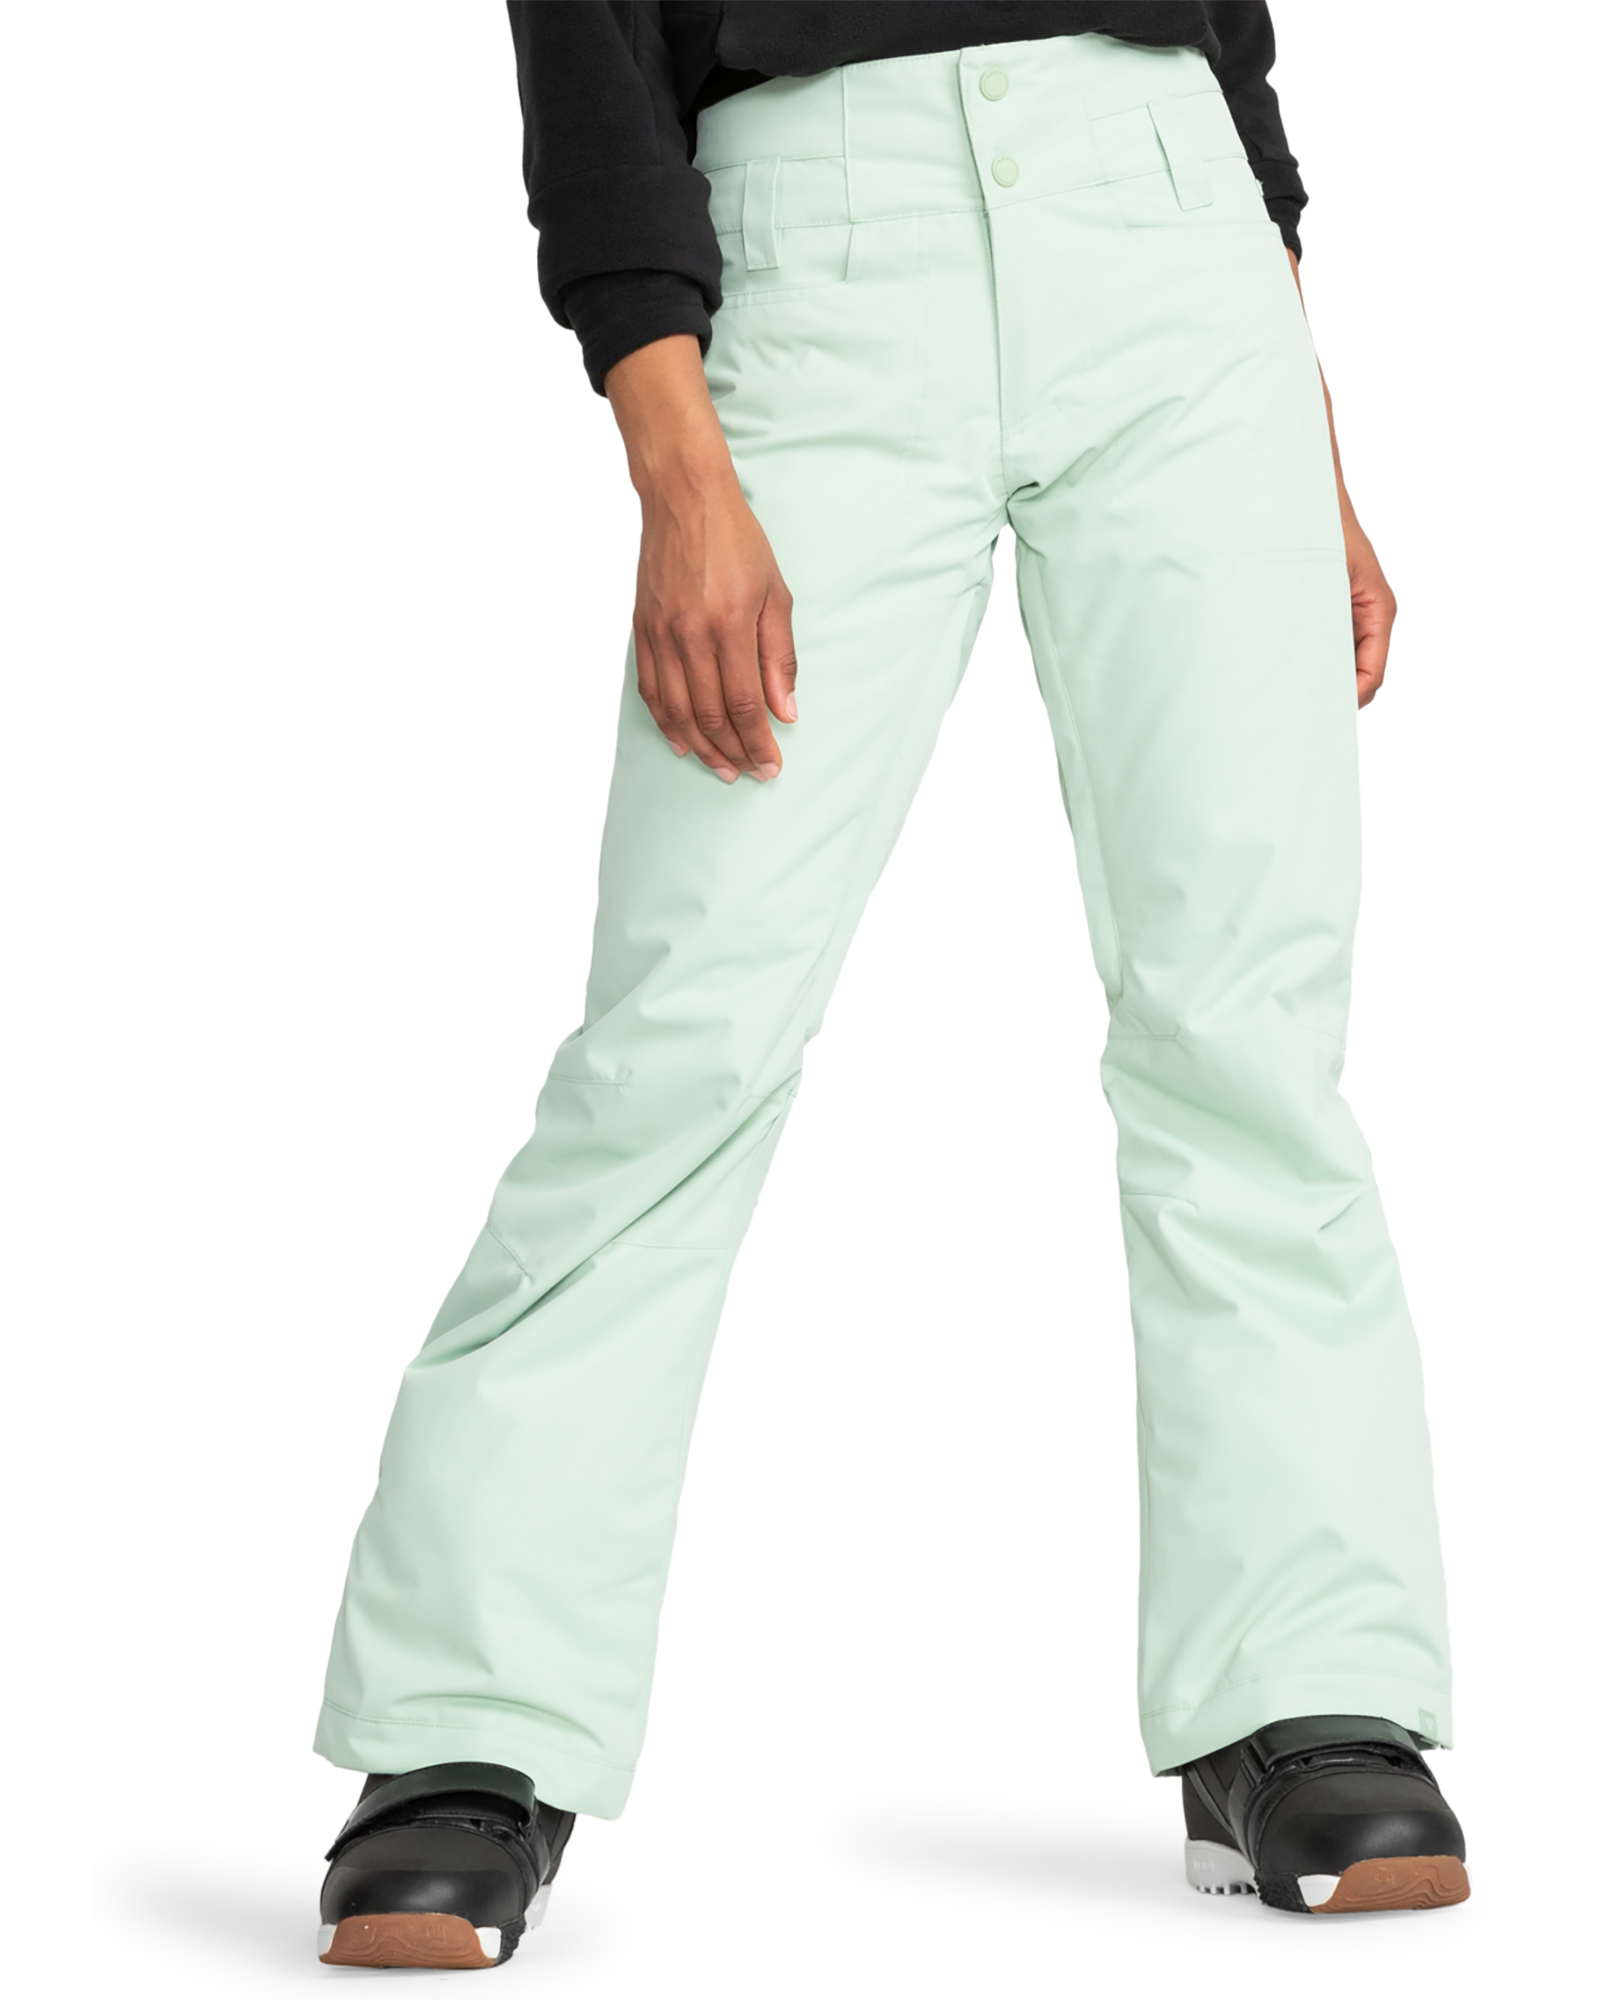 Roxy Women’s Division Pants - Cameo Green M